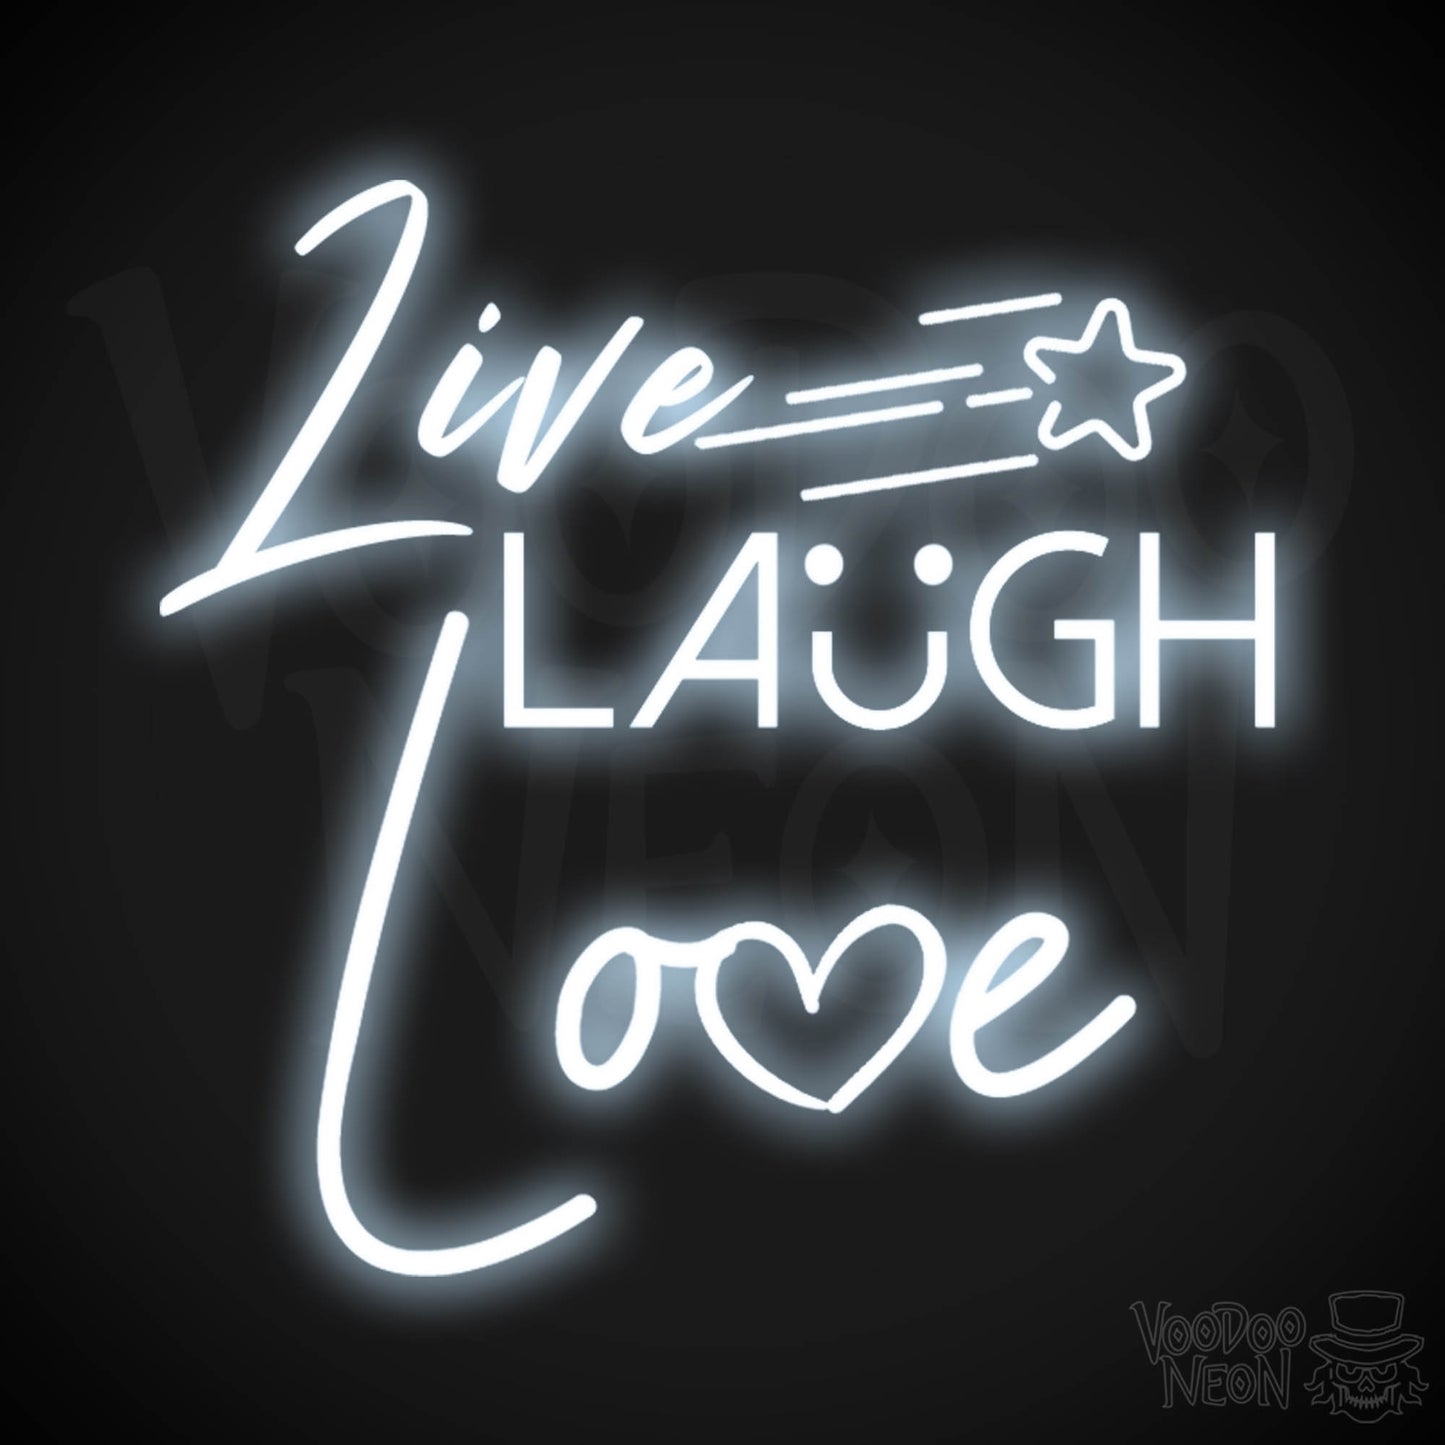 Live Laugh Love Neon Sign - Neon Live Laugh Love Sign - Wall Art - Color Cool White